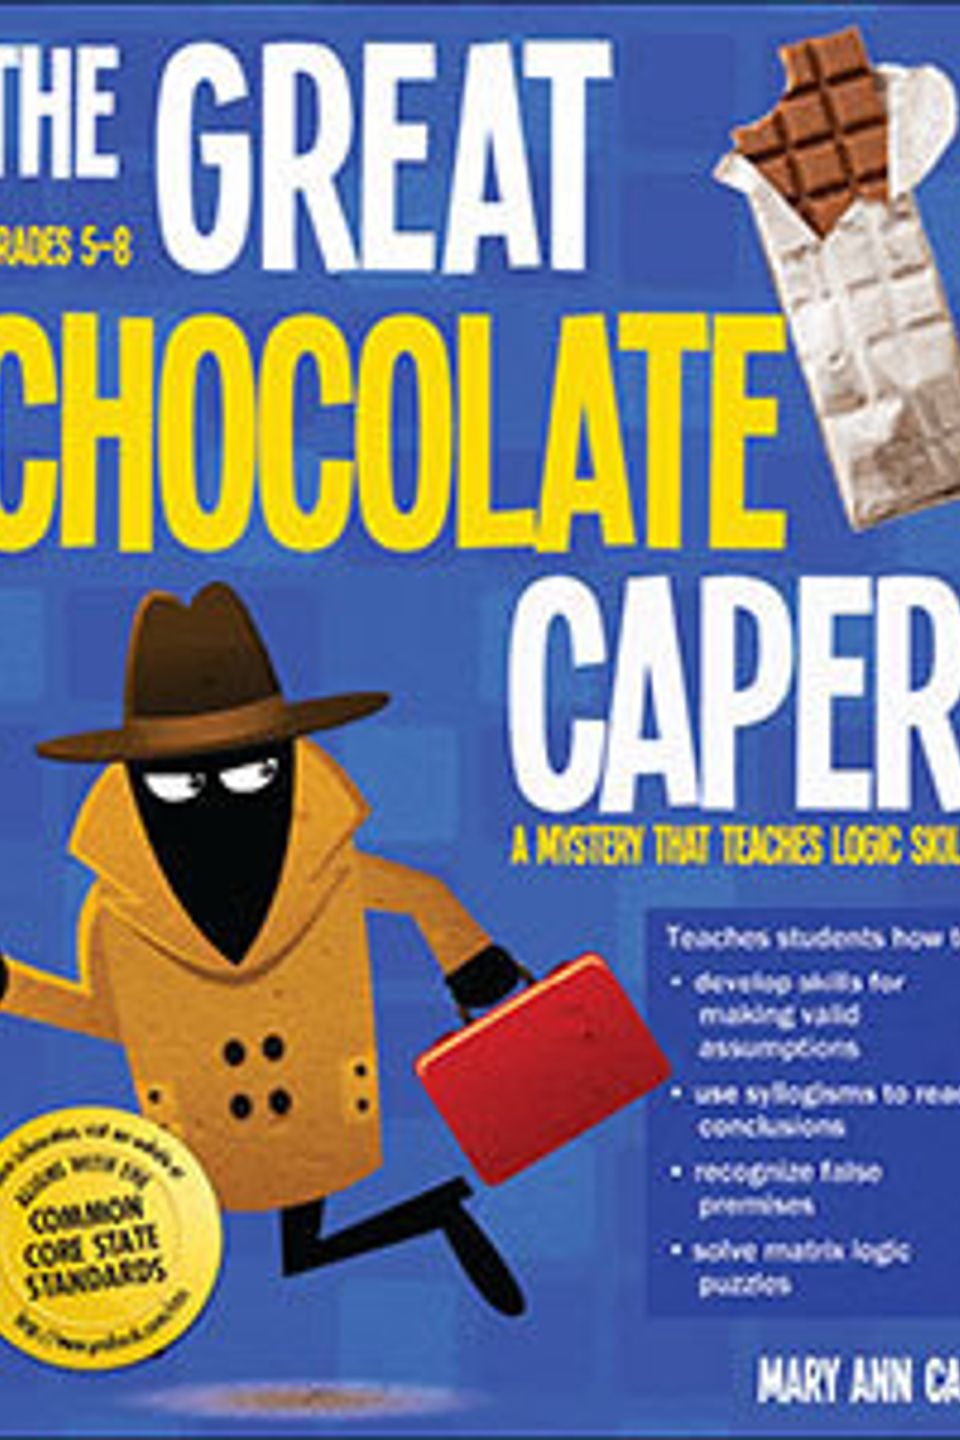 Great chocolate caper20160512 3781 ns3221